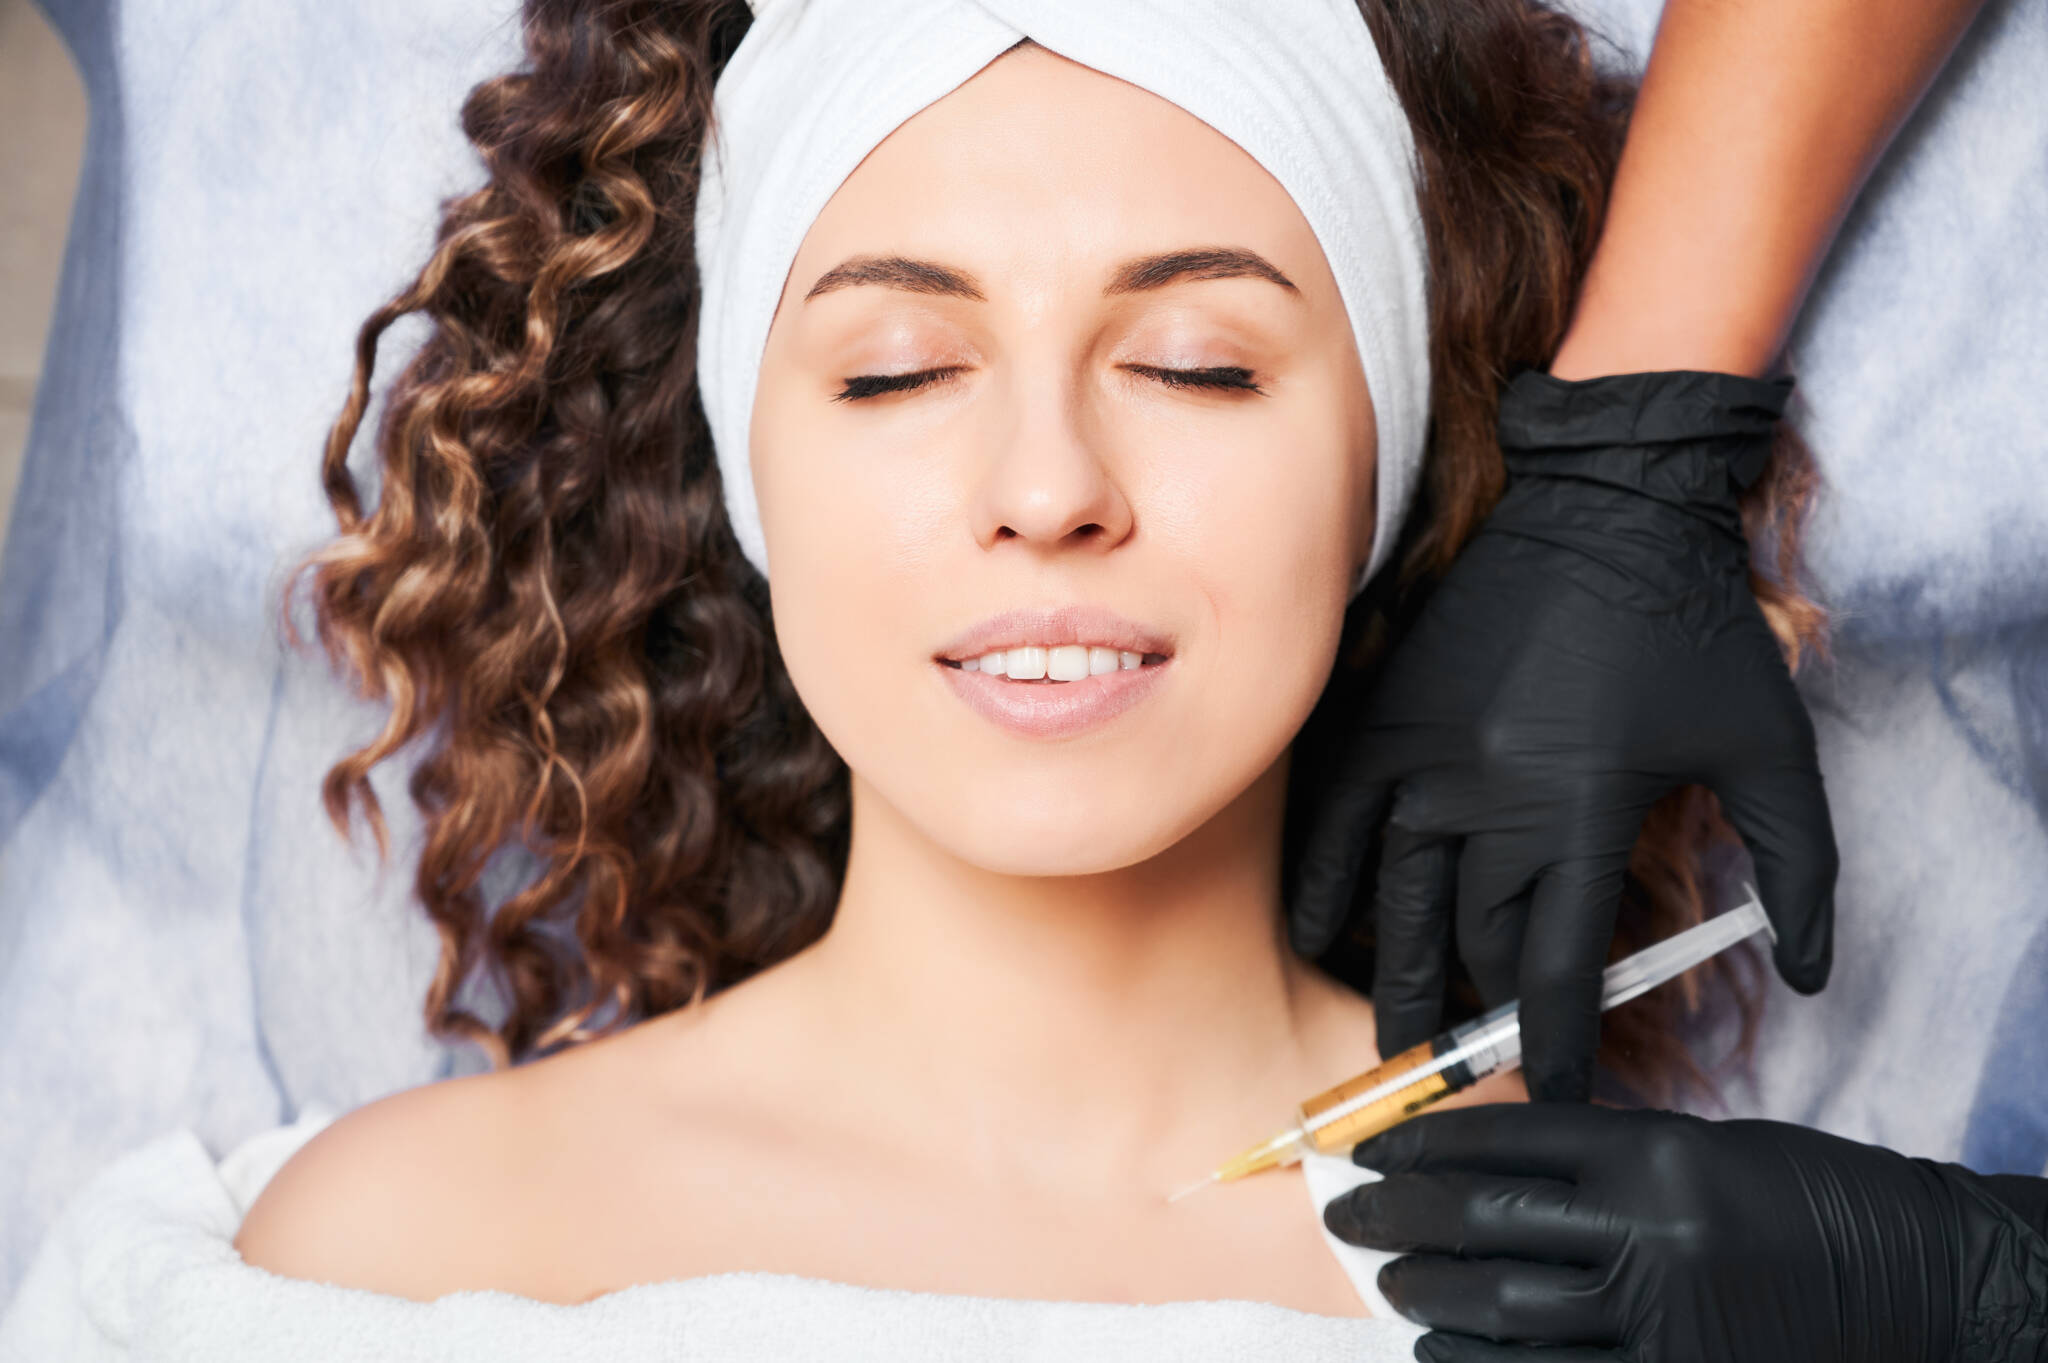 Woman getting minimally invasive injections in neck to prevent wrinkles.